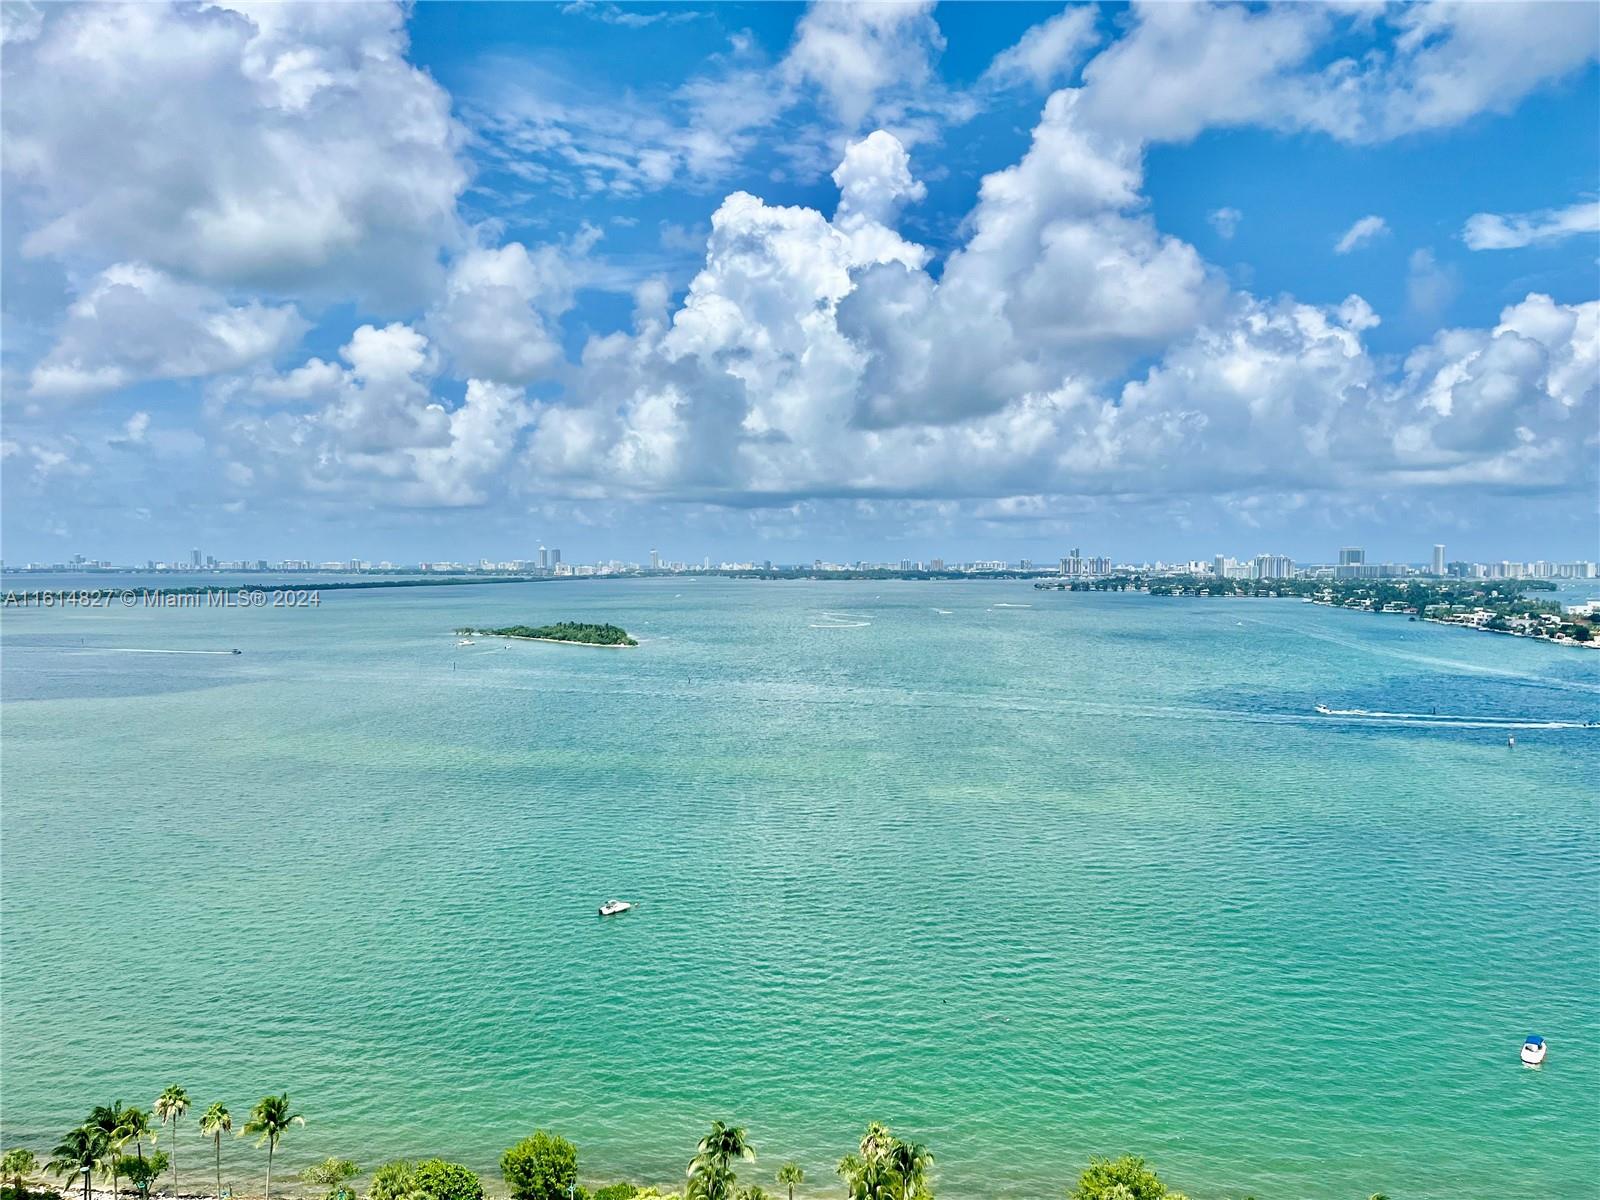 SPECTACULAR 2/2 W/1154SQFT OF AC SPACE + 232SQFT IN TER W/DIRECT BAY VIEWS. OPEN KITCHEN. MARBLE FLOORS. SPLIT BEDROOMS .CORNER UNIT. FLOOR-TO-CEILING WINDOWS. CABLE,INTERNET,WATER & 1 PARKING SPACE INCLUDED IN HOA. FULL SERVICE BUILDING W/VALET, DOORMAN, CONCIERGE, POOL ATTENDANT, IN -HOUSE MANAGEMENT, SKY LOBBY, SOCIAL ROOM, HEATED POOL, JACUZZI,PLAY ROOM W/POOL TABLE AND SO MUCH MORE. WALK TO MARGARET PACE PARK CAFES, NIGHTLIFE BANKS, SHOPS & PUBLIX. 2  BLOCKS TO PEOPLE MOVER. 5 MINUTES TO SOUTH BEACH, DOWNTOWN MIAMI, THE DESIGN DISTRICT, MIDTOWN,WYNWOOD & EASY ACCESS TO ALL MAJOR HIGHWAYS.EASY TO SHOW.